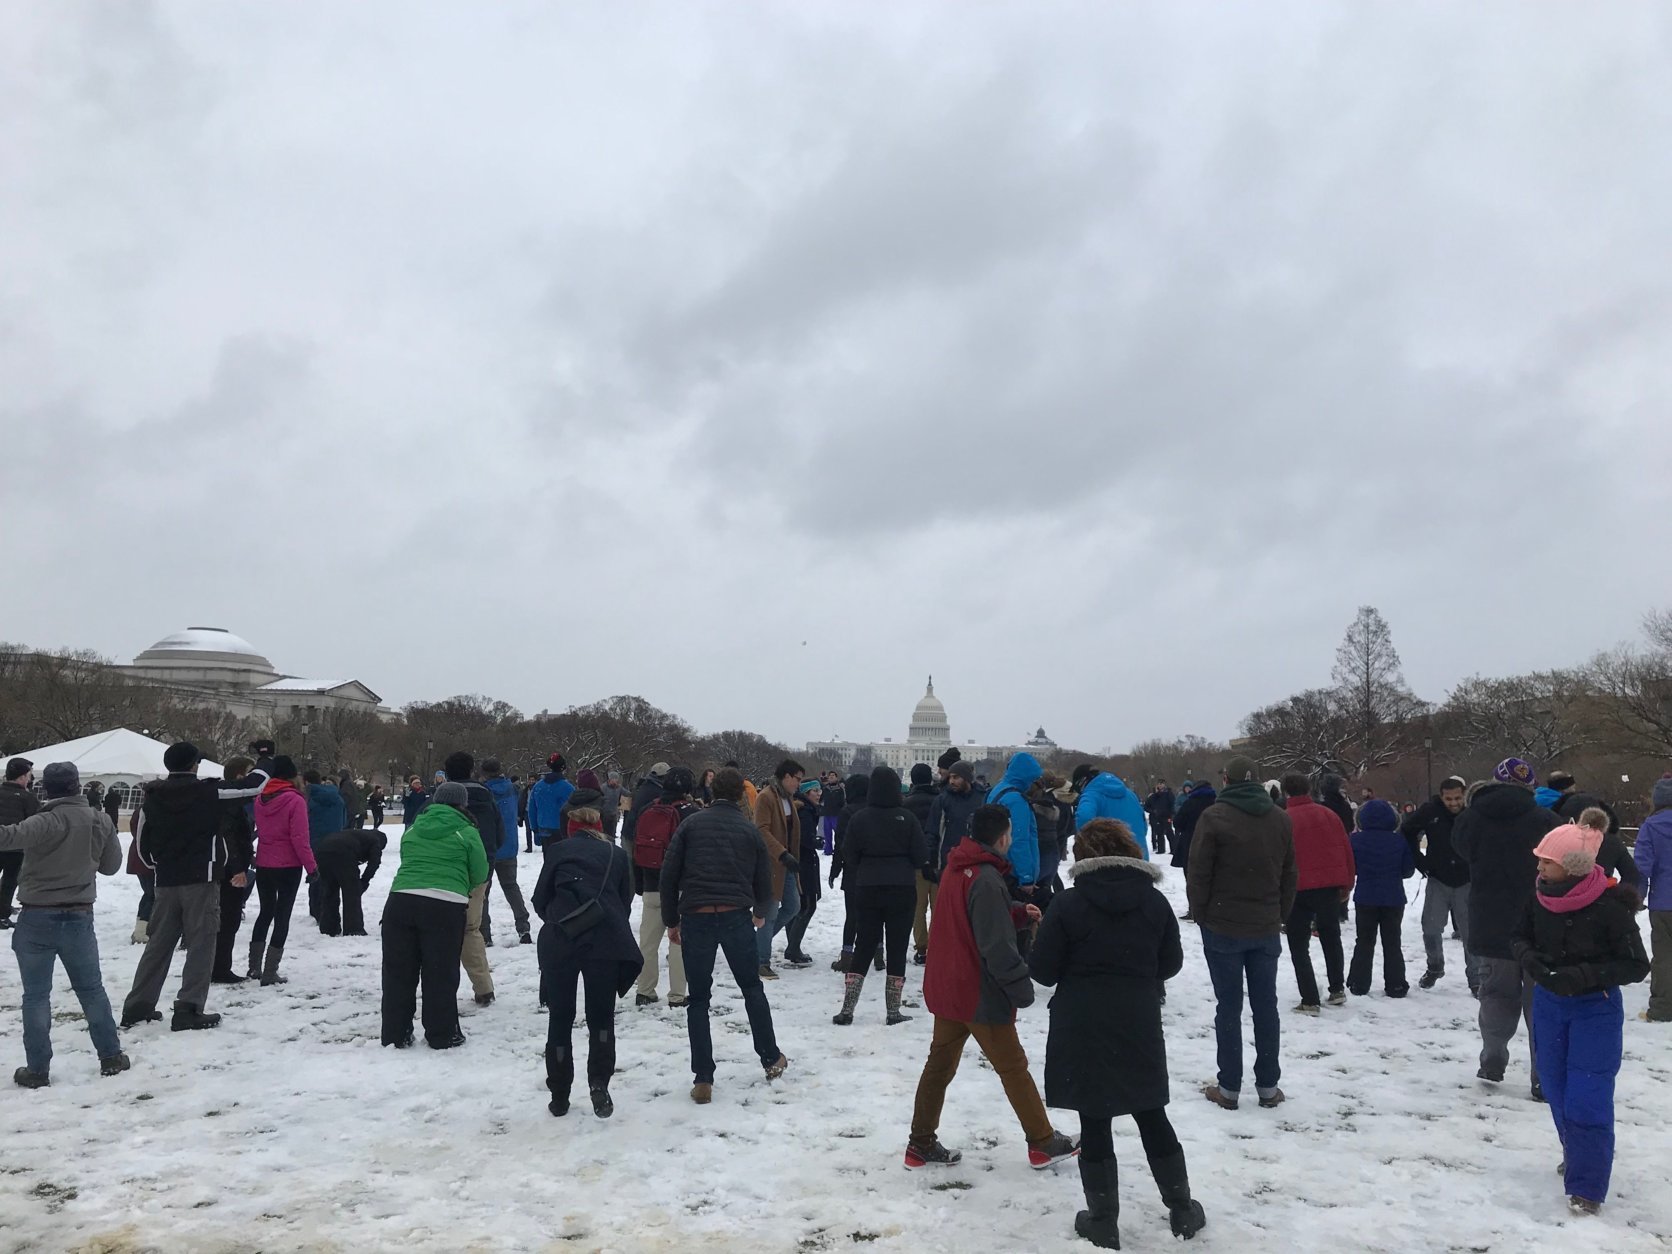 A group gathers at the National Mall on Wednesday, March 21, 2018, for a snowball fight. (WTOP/Dick Uliano)